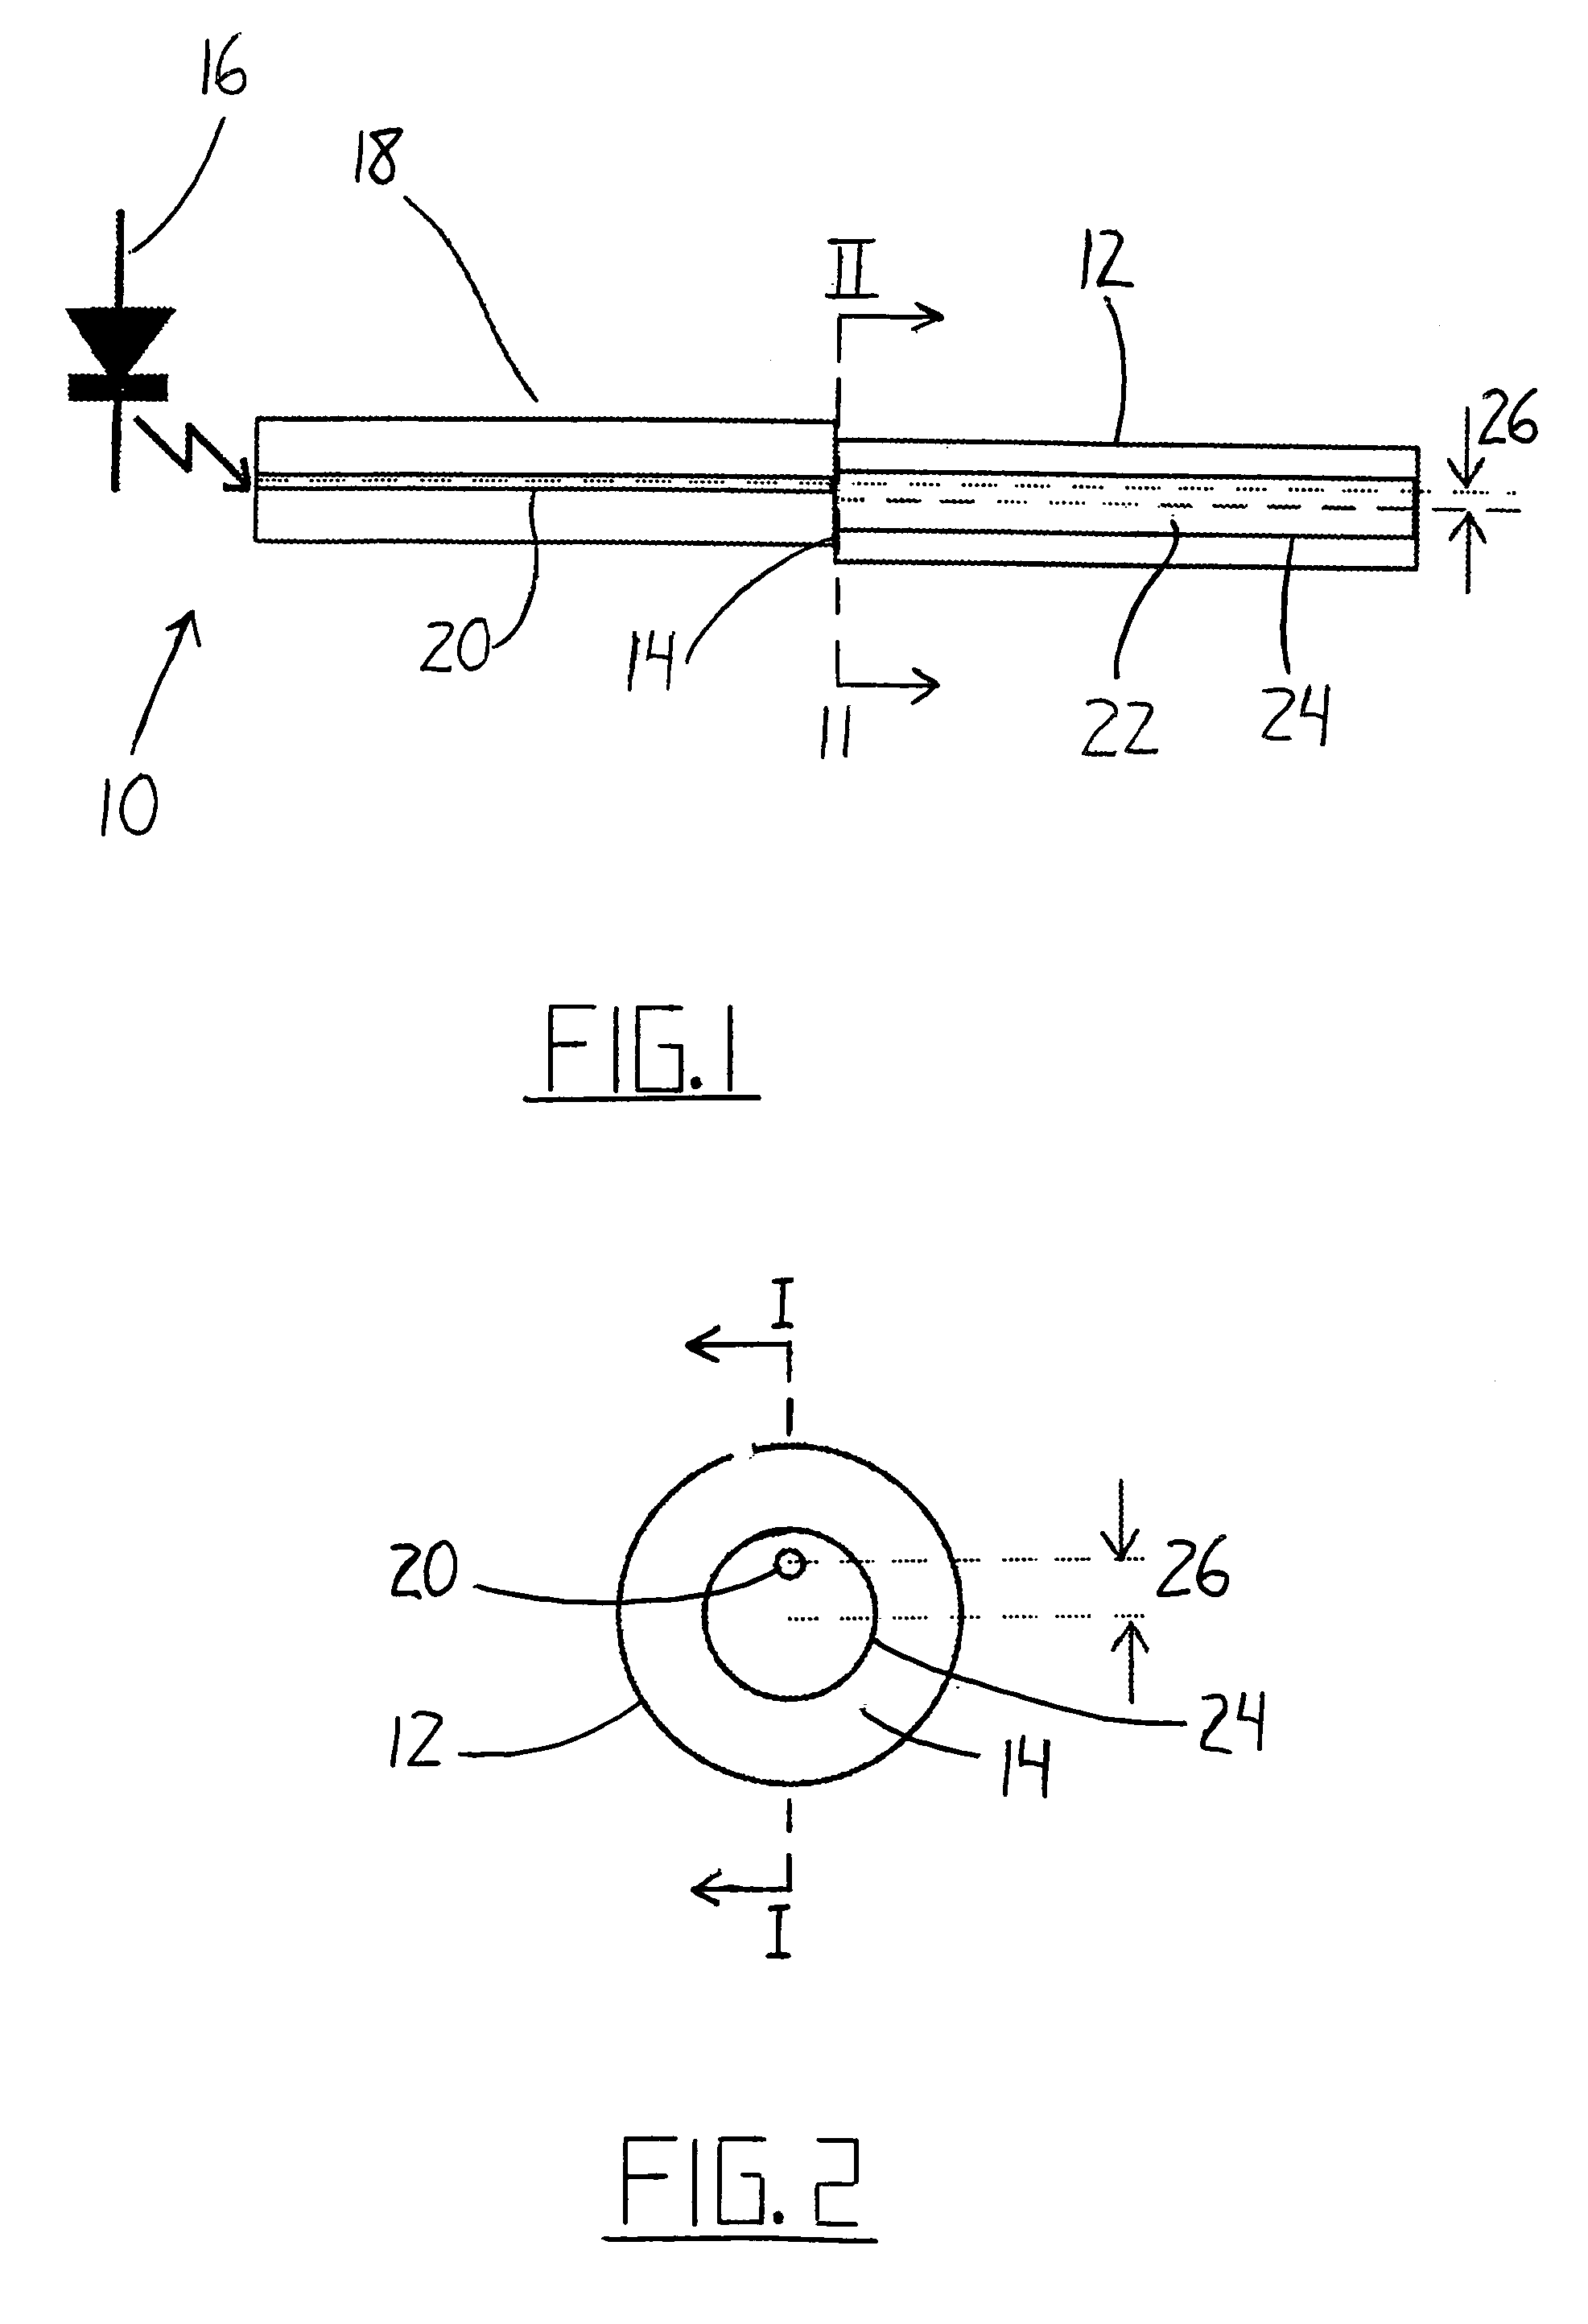 Intrusion detection system for use on an optical fiber using a translator of transmitted data for optimum monitoring conditions